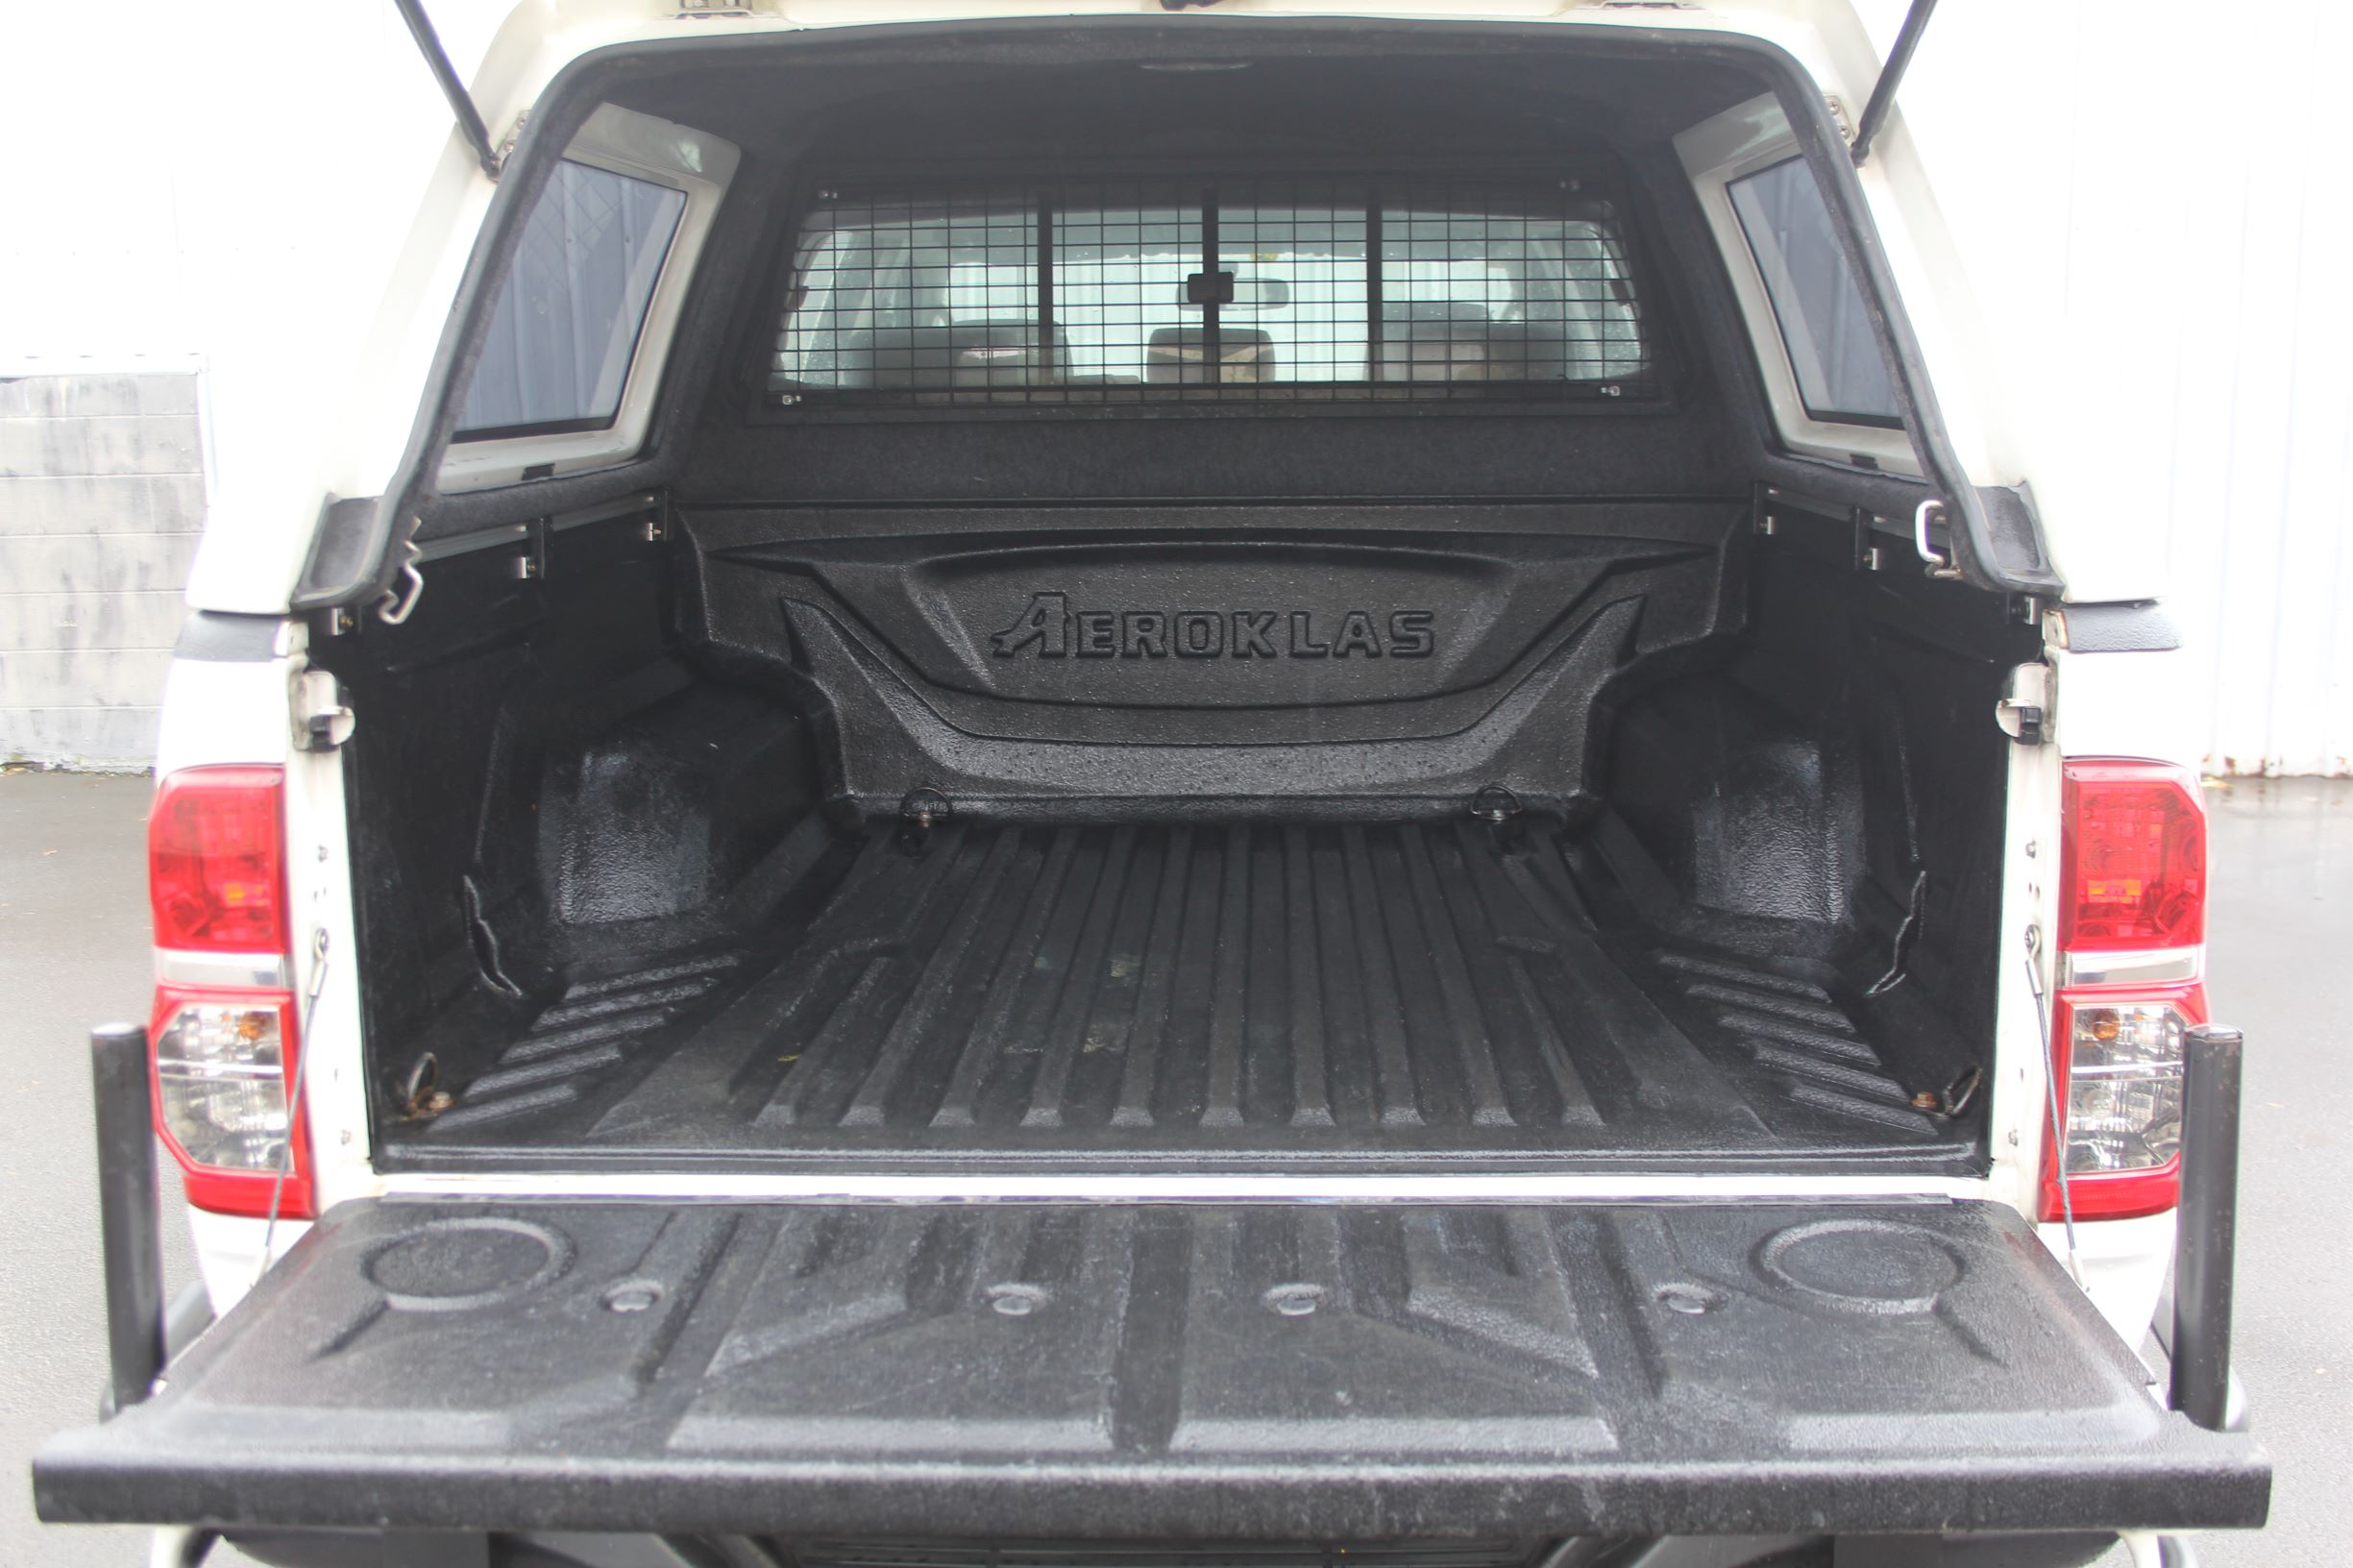 Toyota Hilux 4WD manual 2014 for sale in Auckland